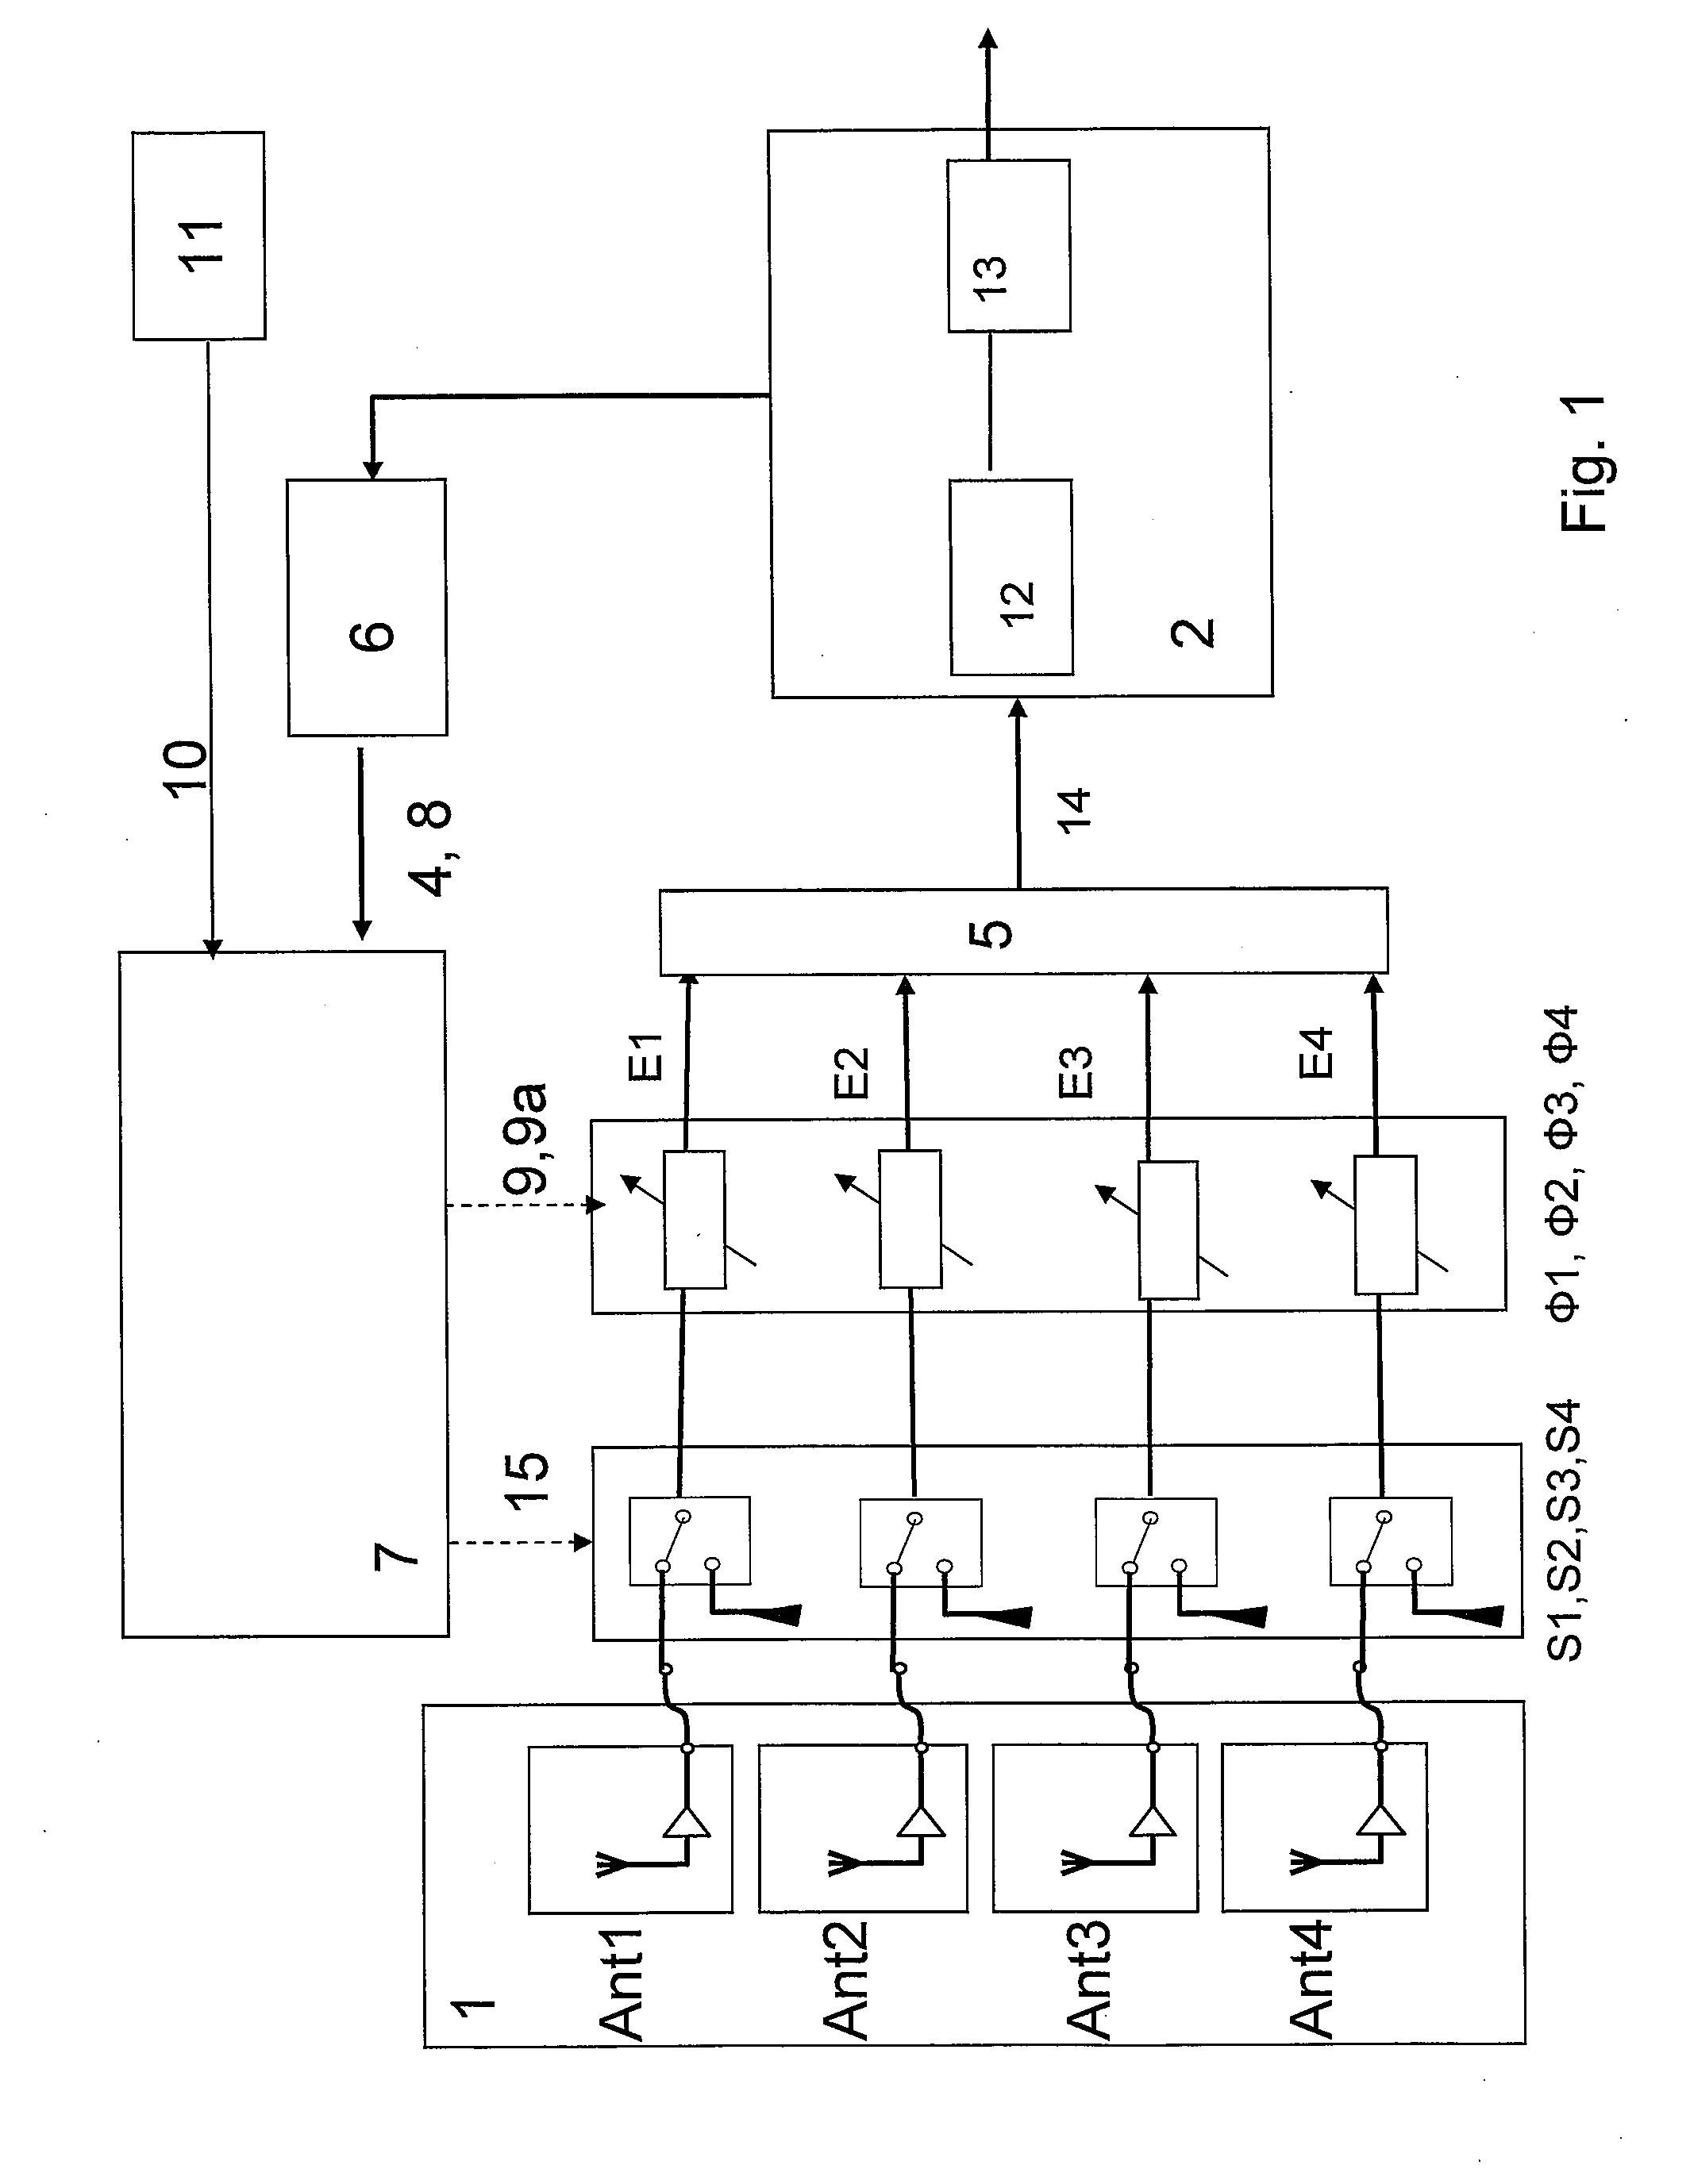 Reception system with phase alignment of antenna signals